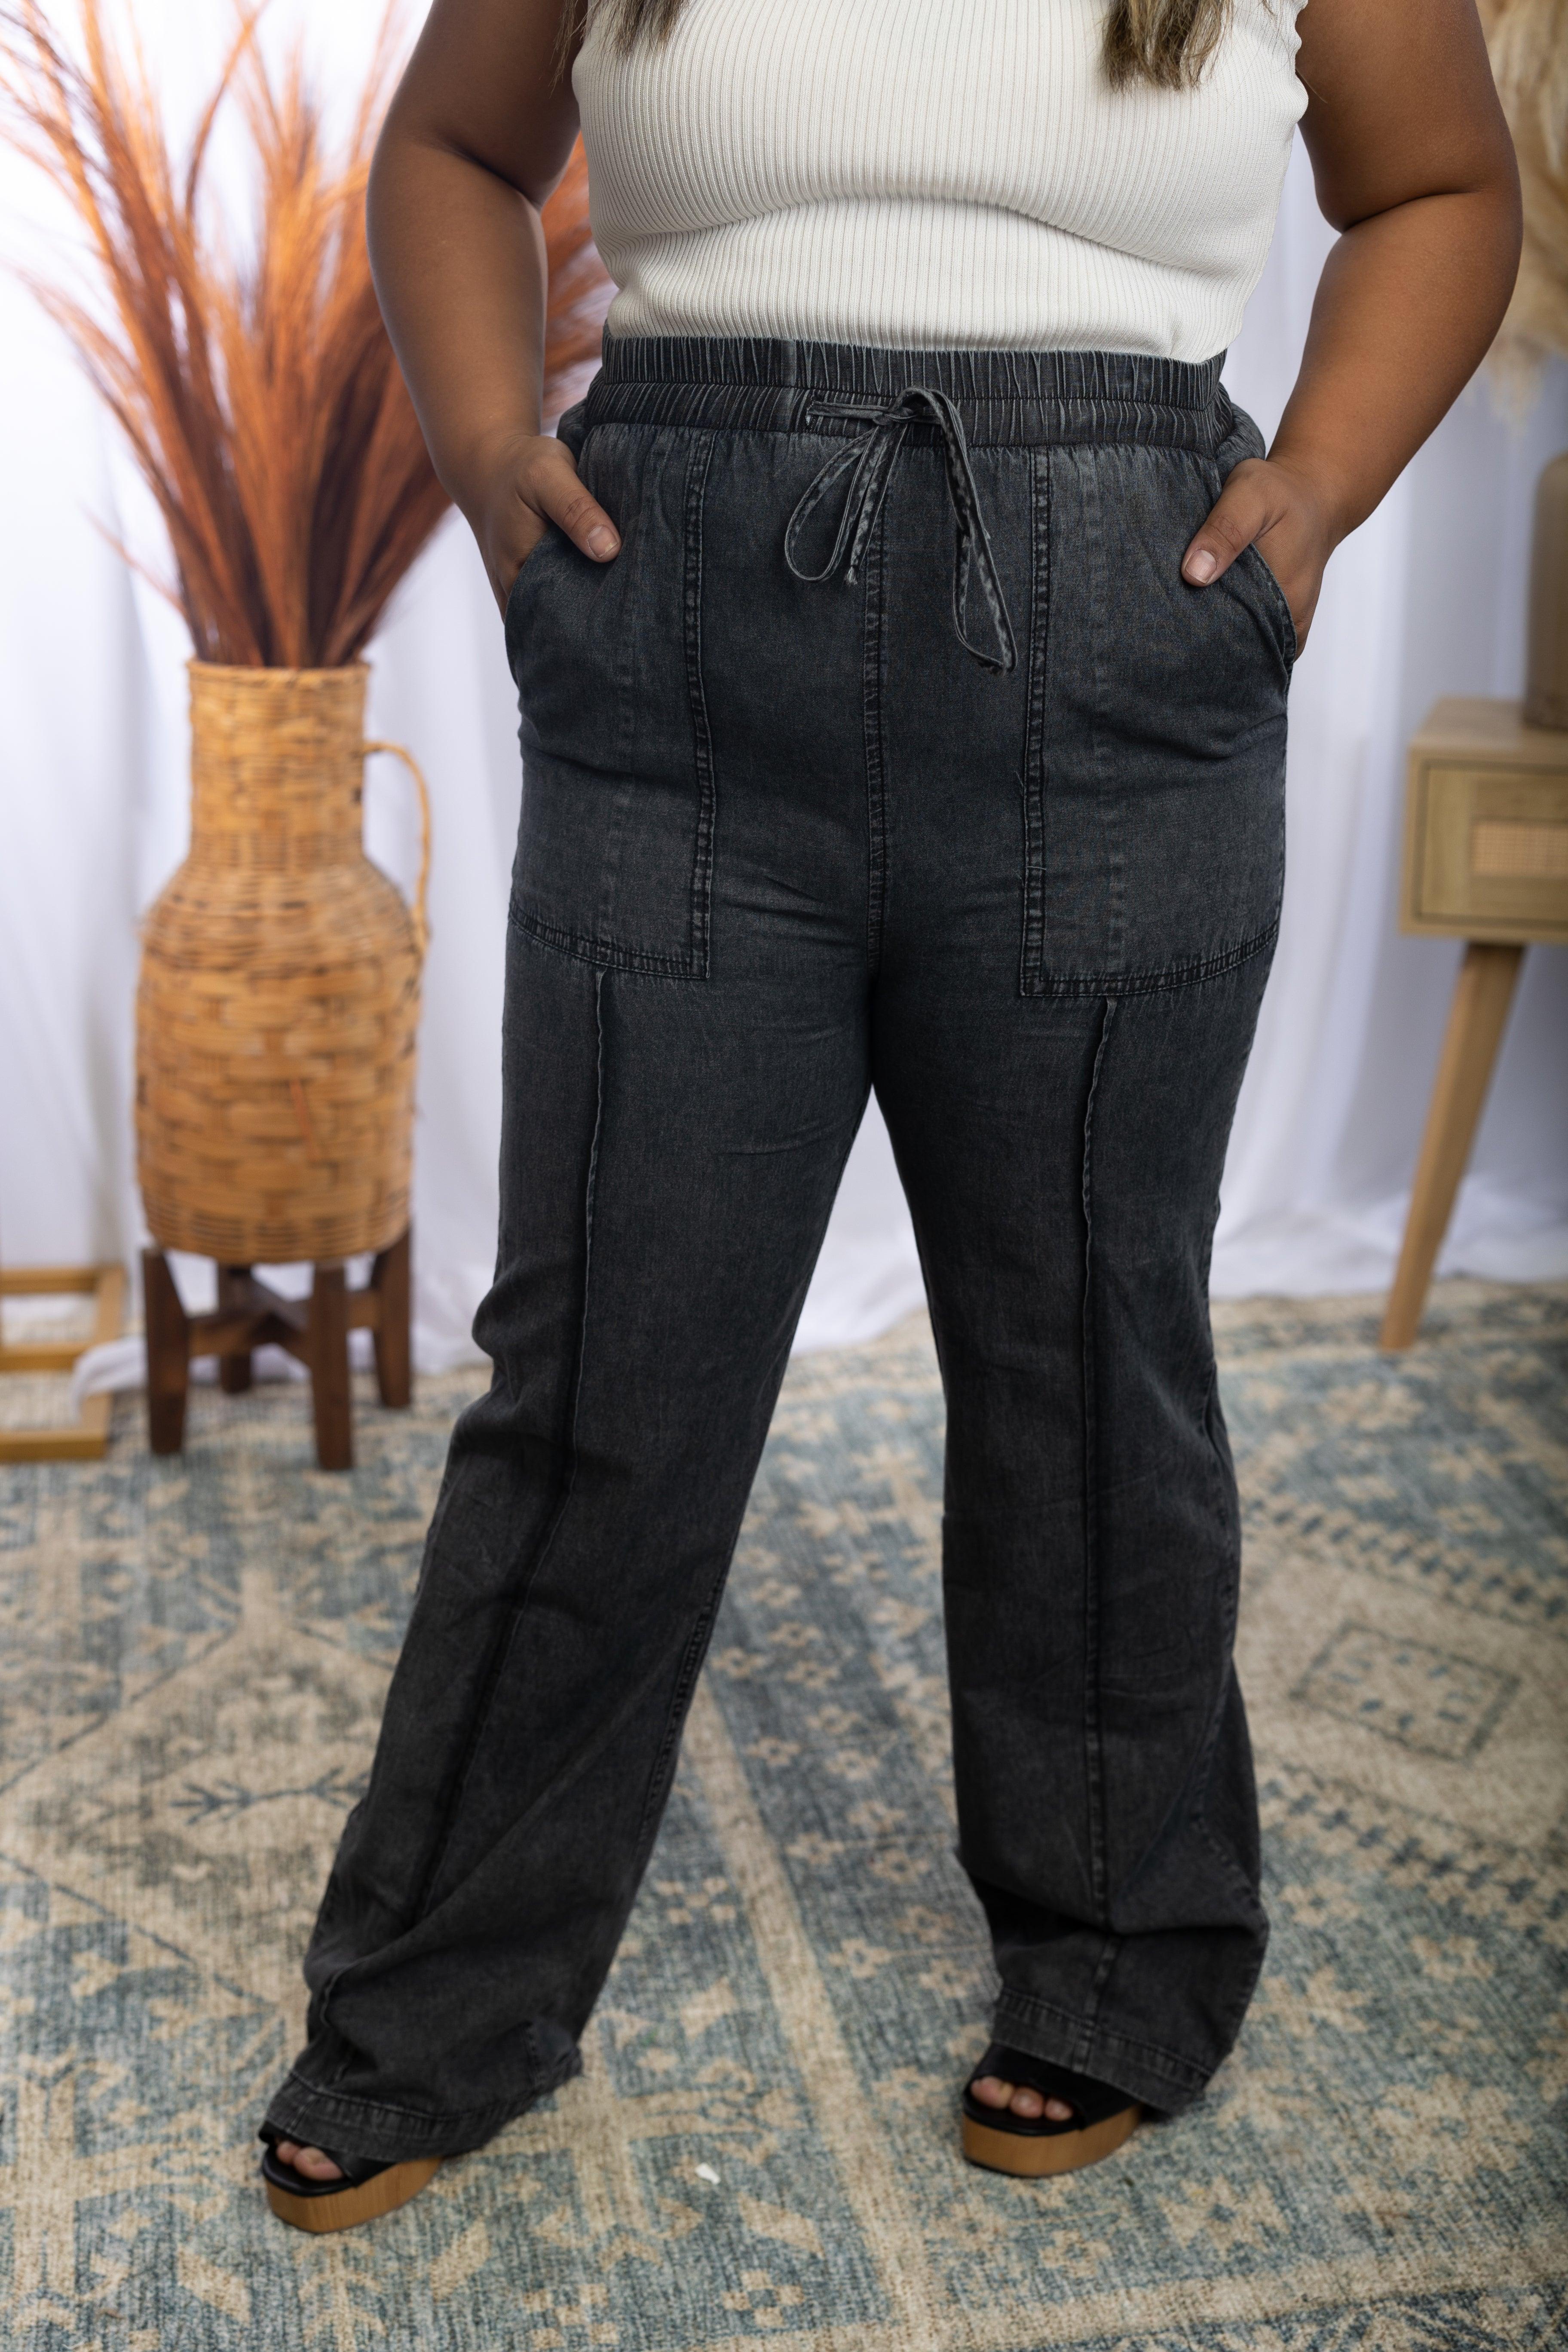 Relax & Unwind - Chambray Pants Giftmas Boutique Simplified   